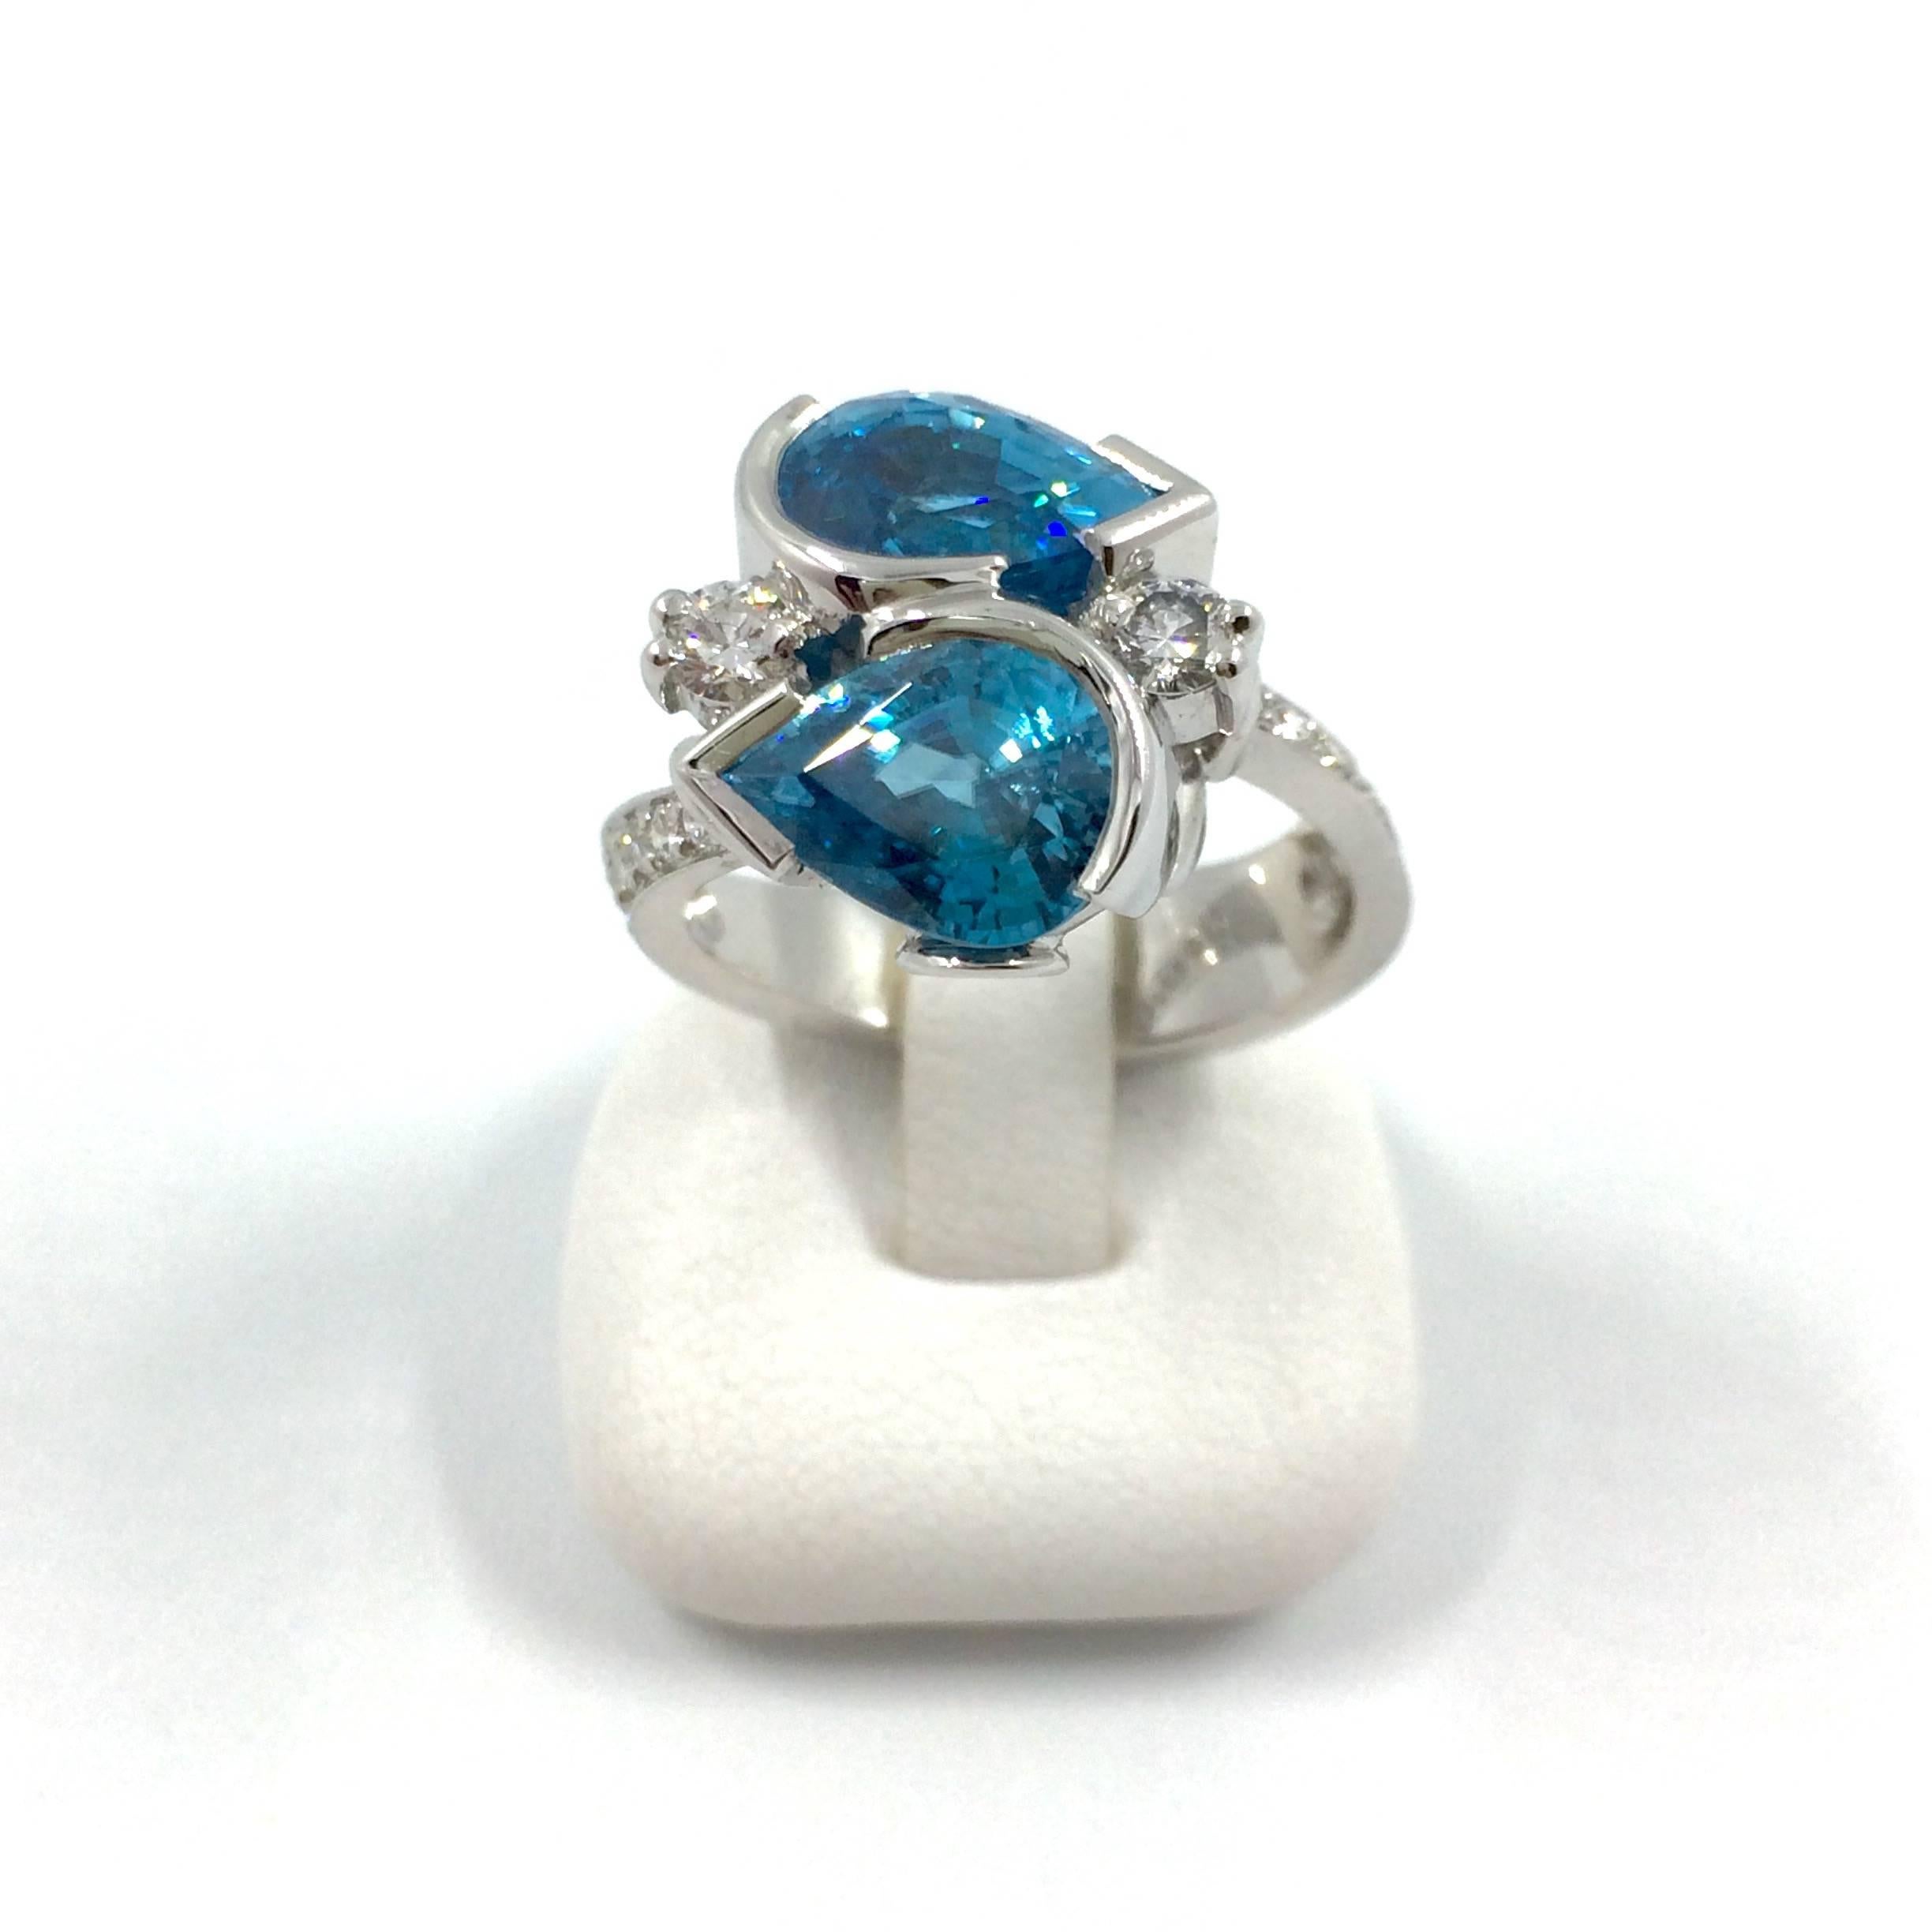 A white gold ring set with two pear cut blue zircon surrounded by 14 brilliant cut diamonds. This bypass ring is a unique creation entirely handmade.
Total Zircon Weight: 7,75 carat
Origin of the zircon: Cambodia
Total Diamonds Weight: 0,78